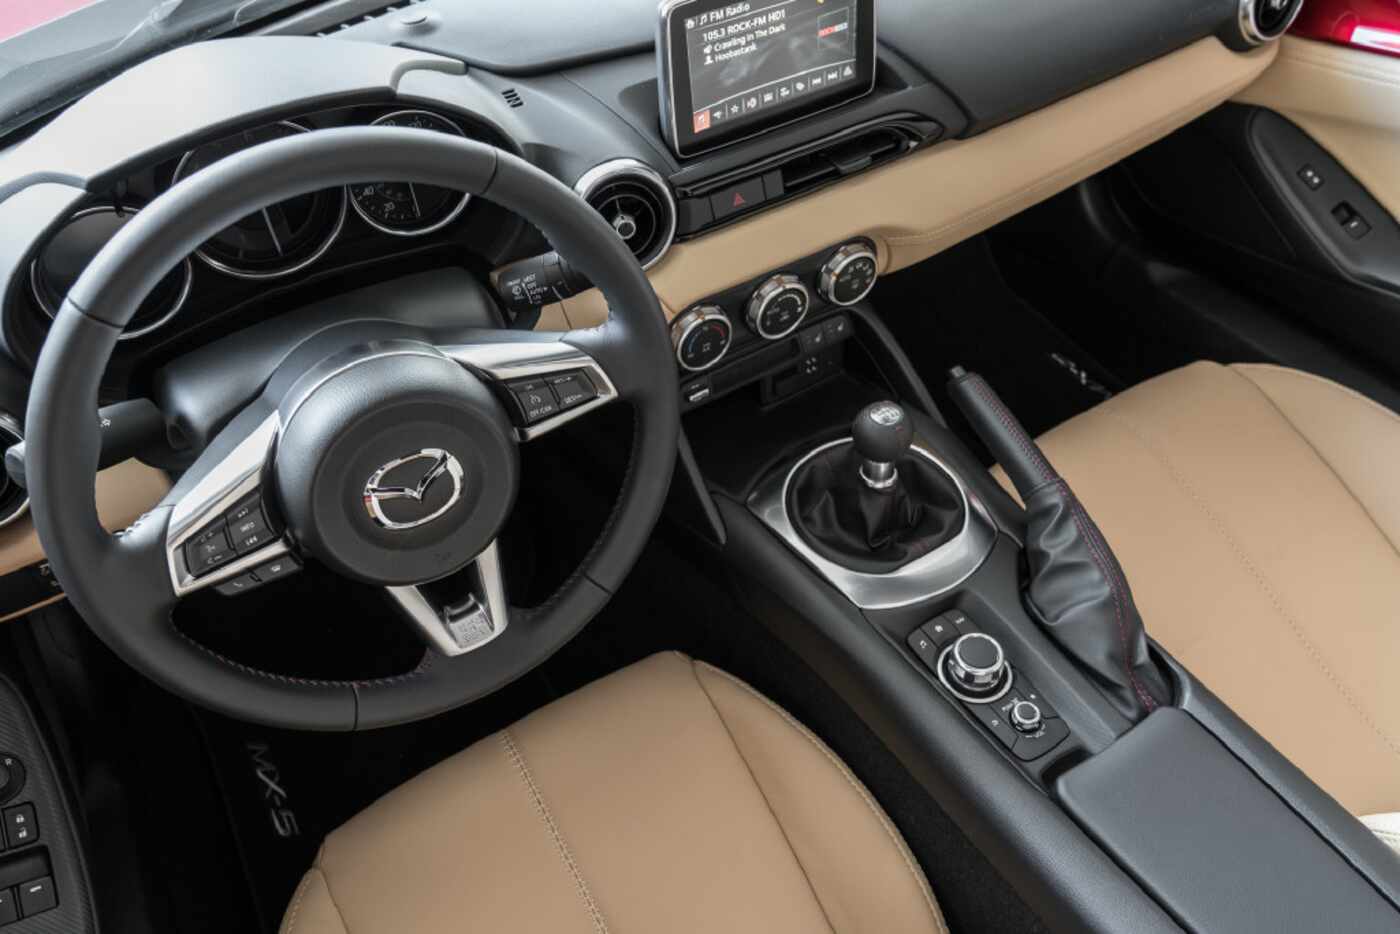 Mazda says 60 percent of MX-5s are sold with the manual gearbox.